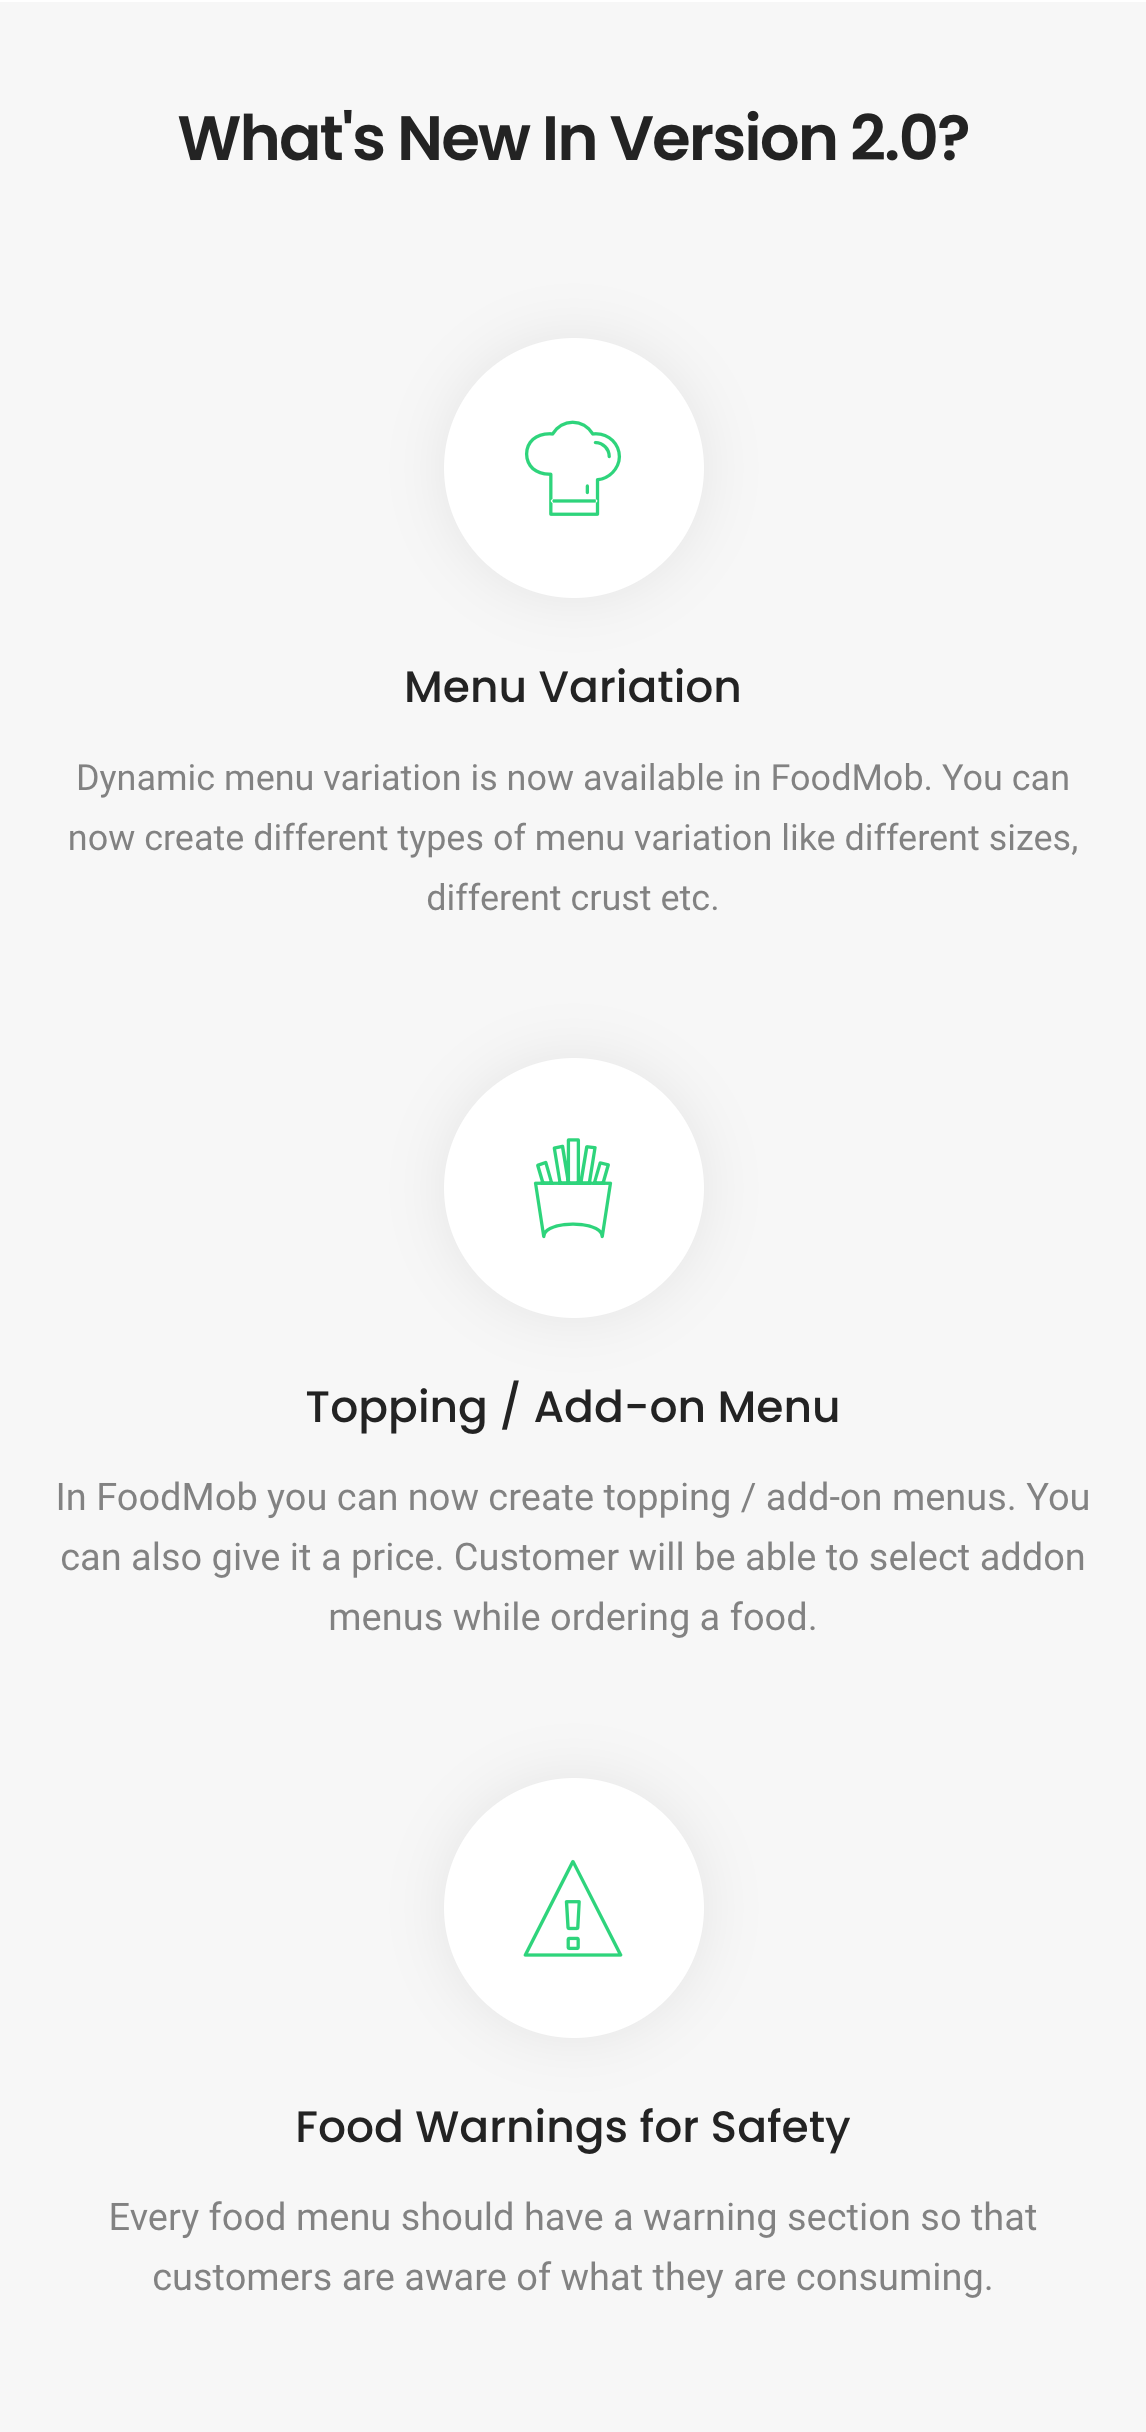 FoodMob - An Online Multi Restaurant Food Ordering and Management with Delivery System version 2.0 features